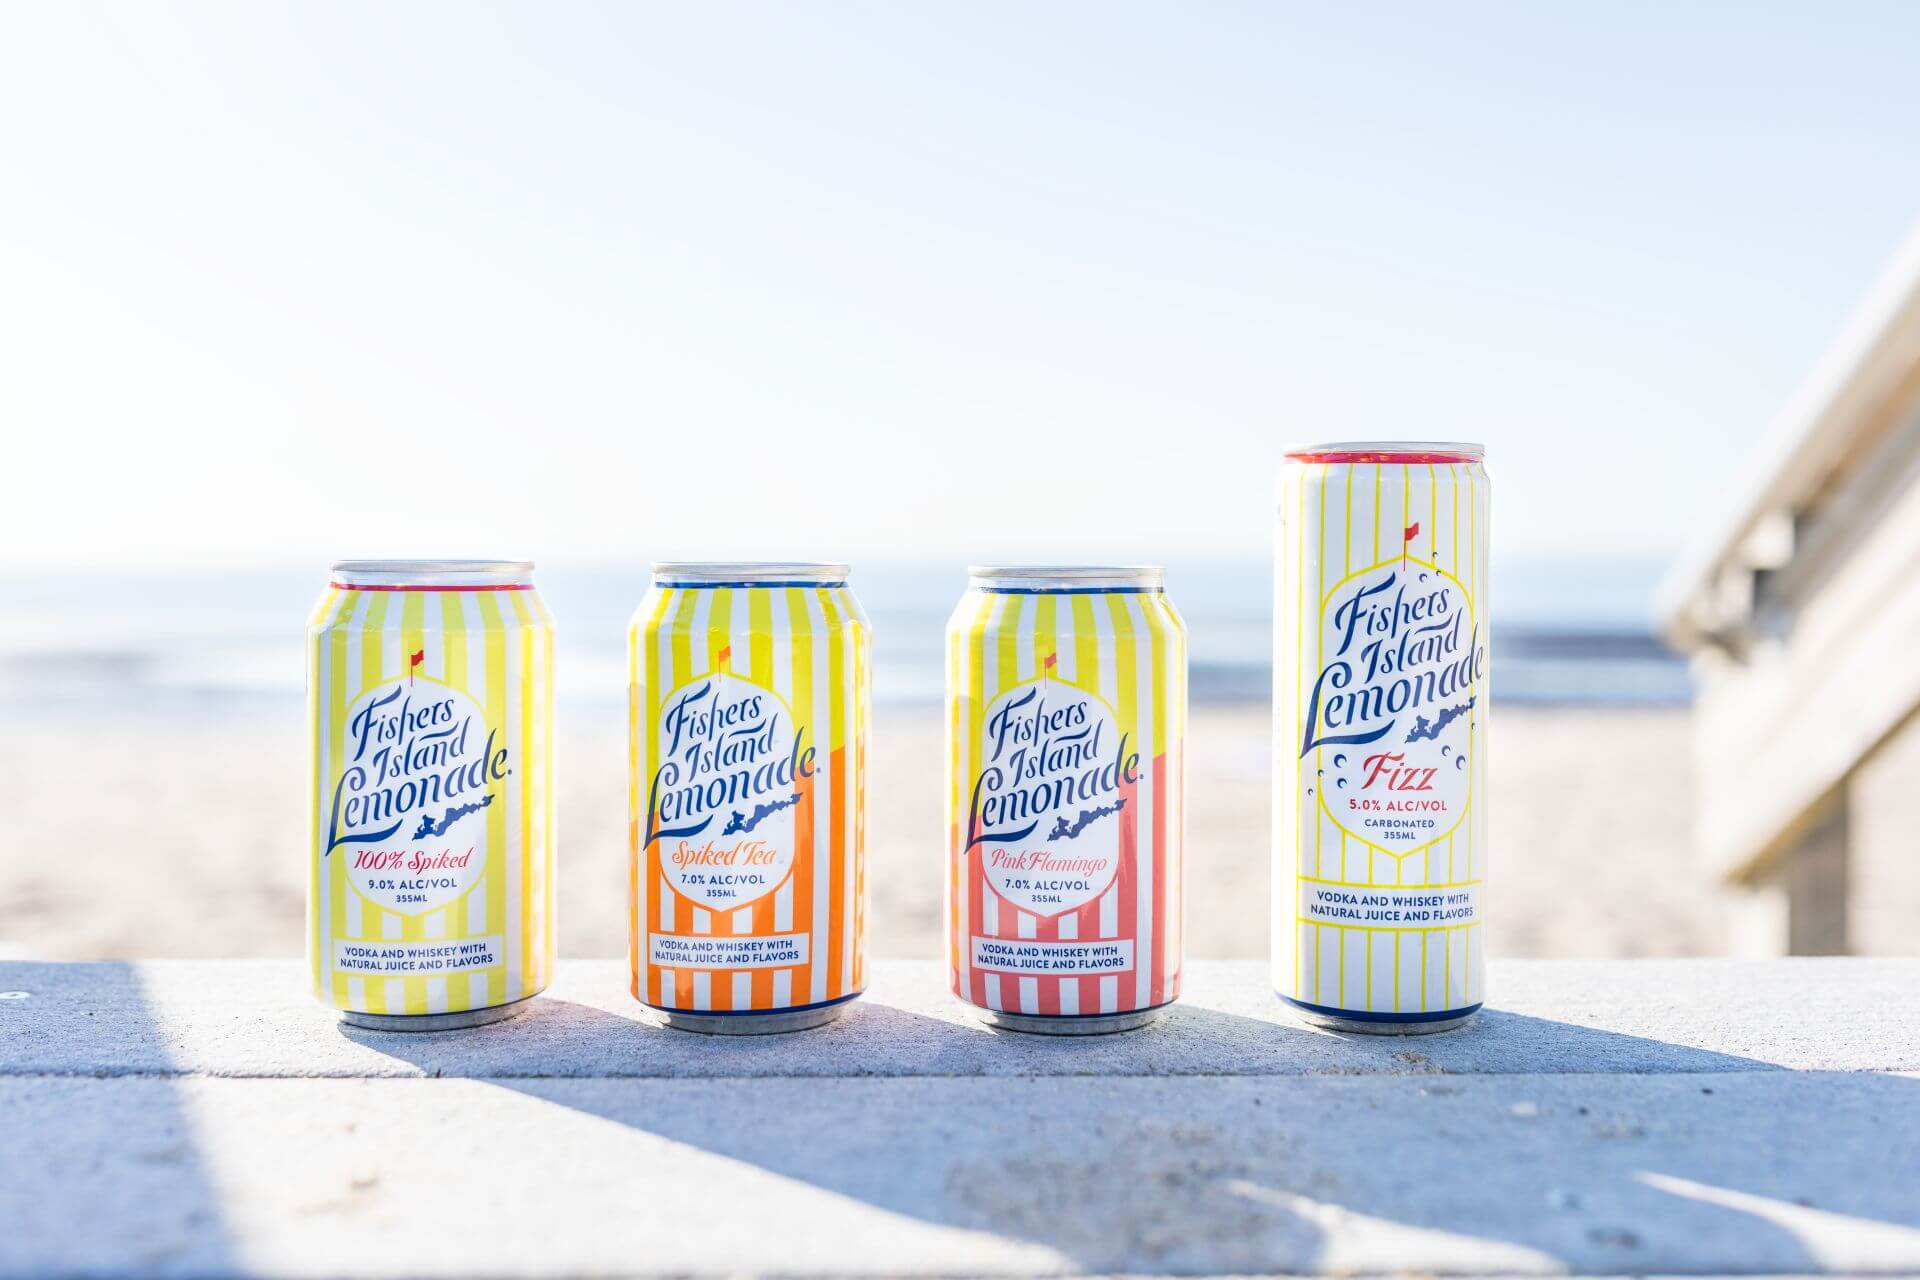 Fishers Island Lemonade cans and flavors